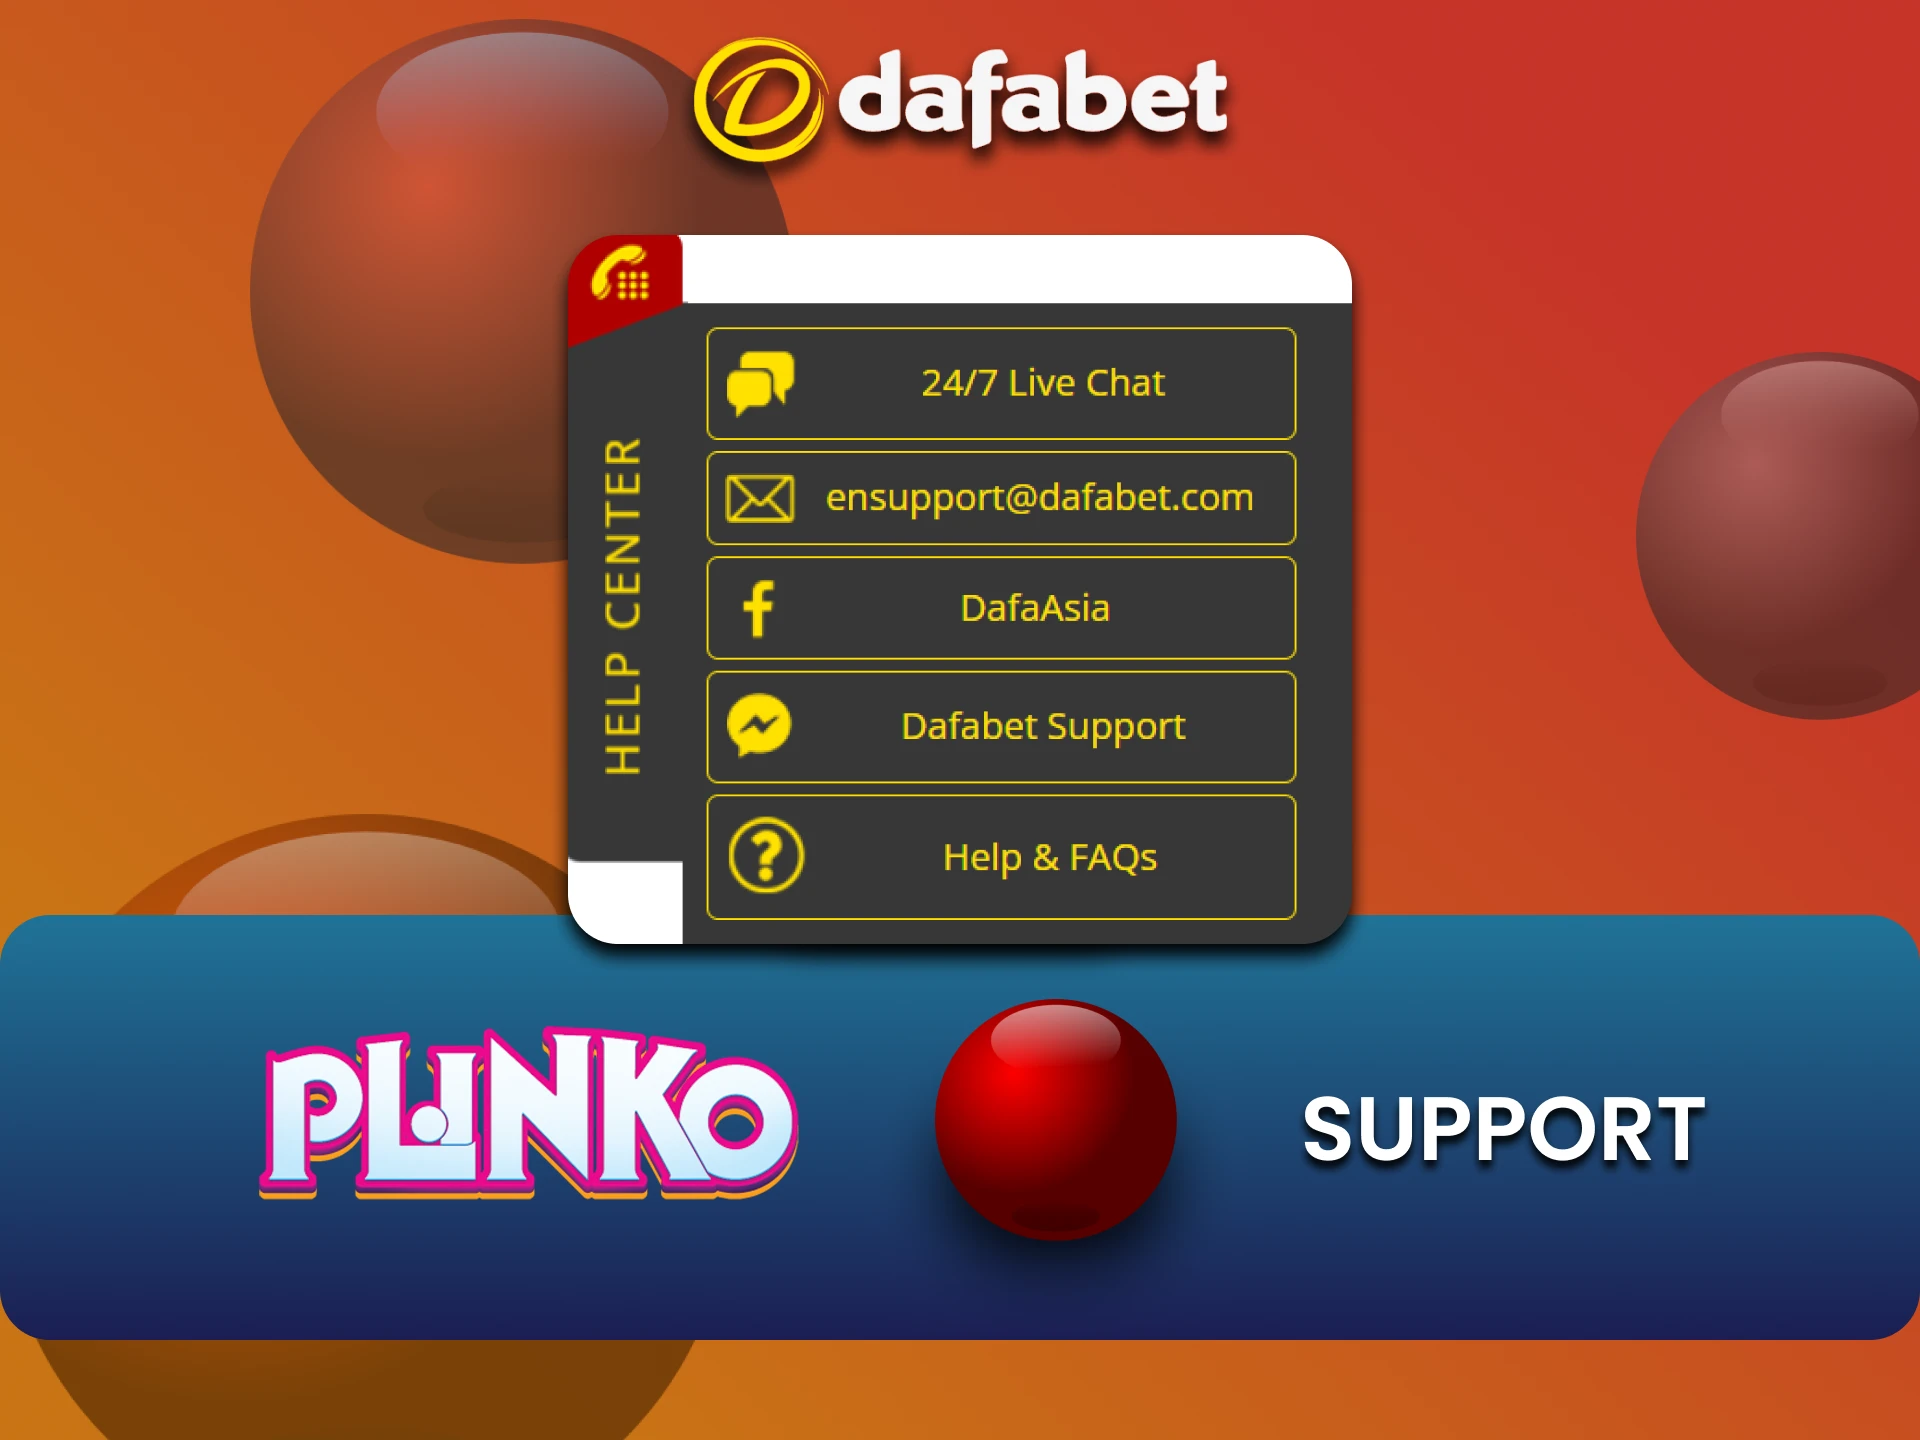 The Dafabet website has support for Plinko players.